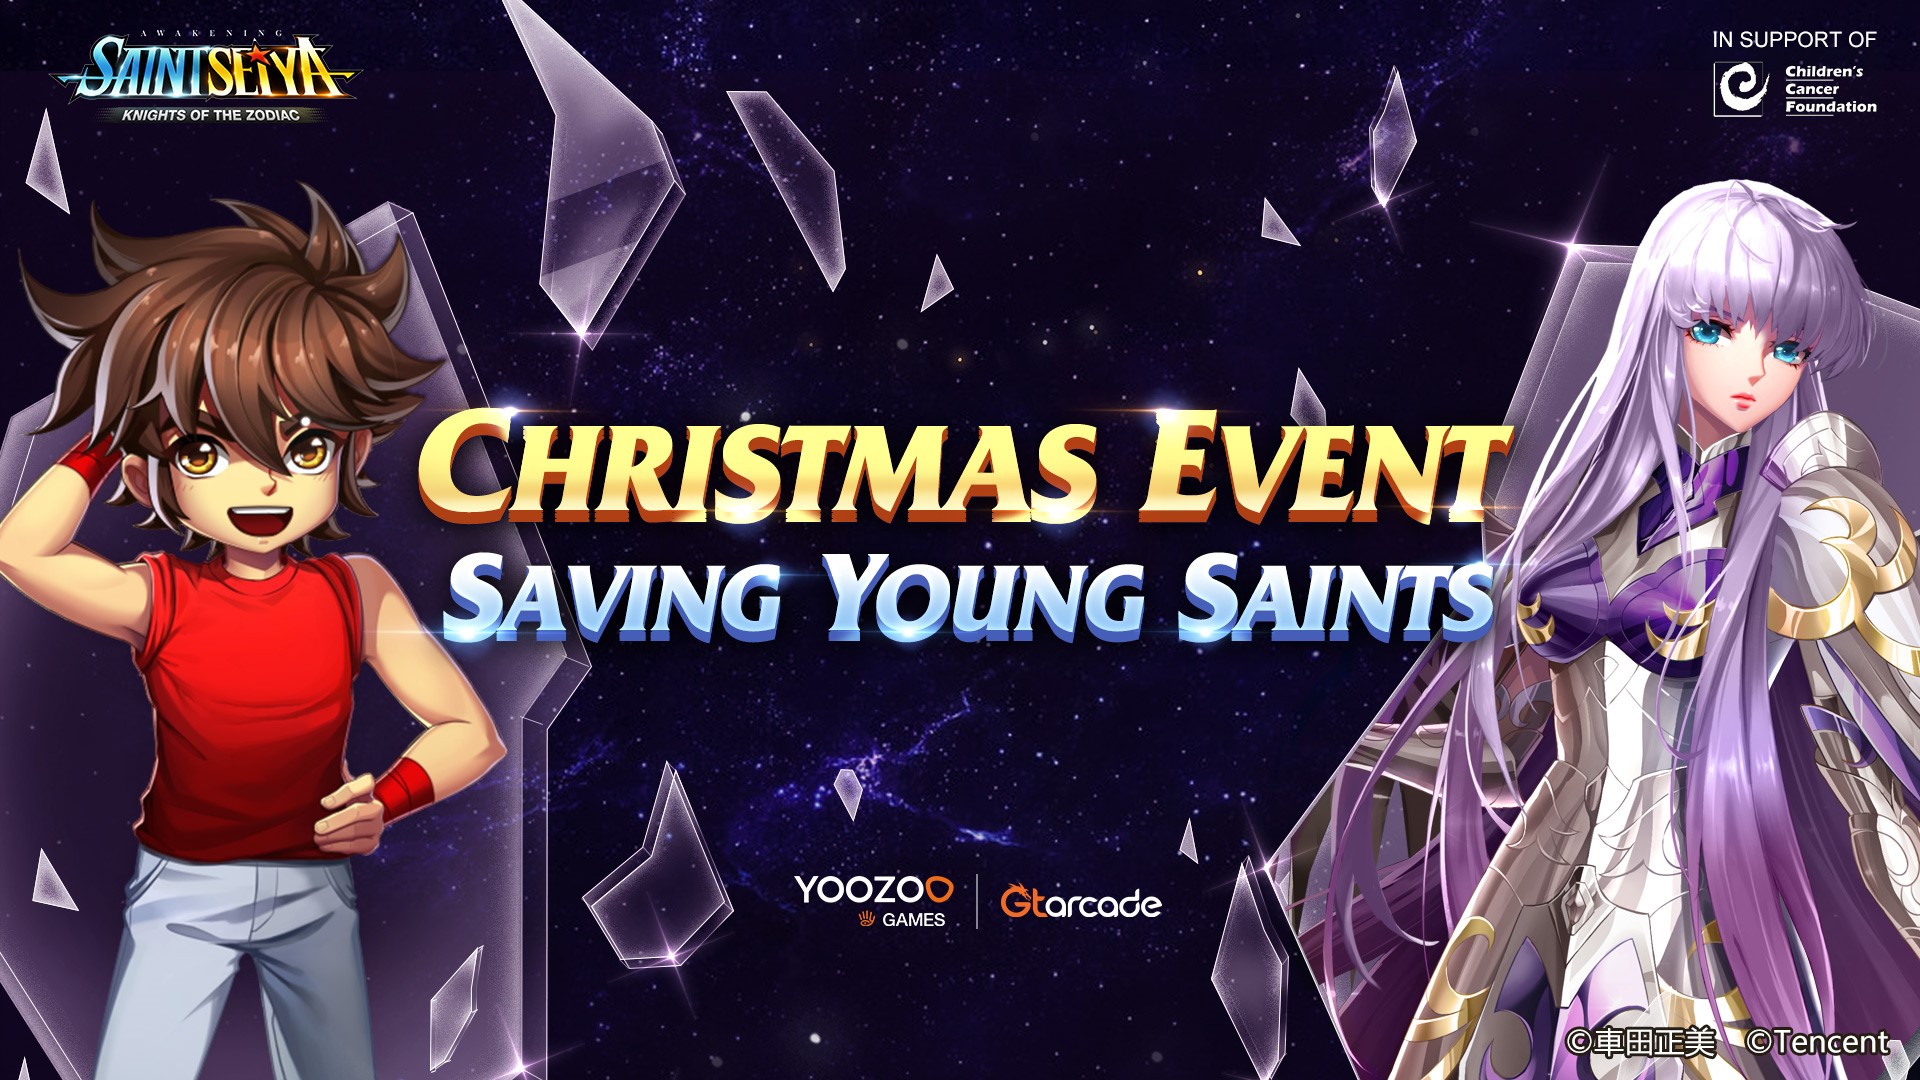 Gtarcade Hosting Saving Young Saints Charity Event to Help Children Suffering from Cancer